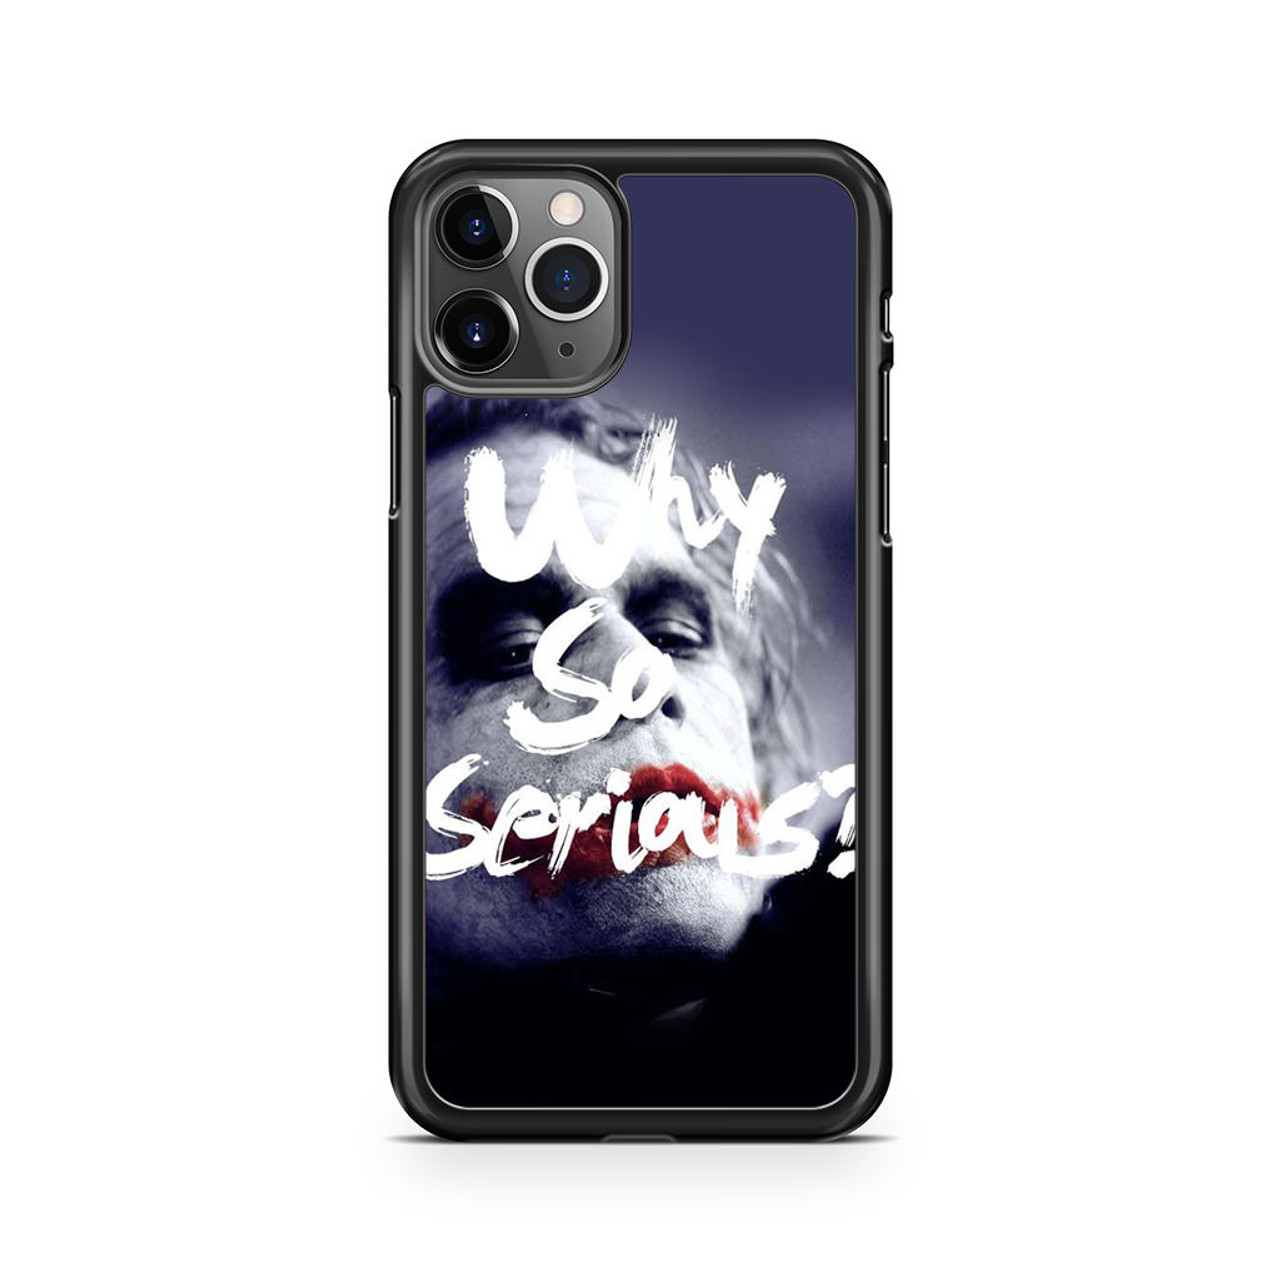 Joker quotes why so serious iphone pro max case